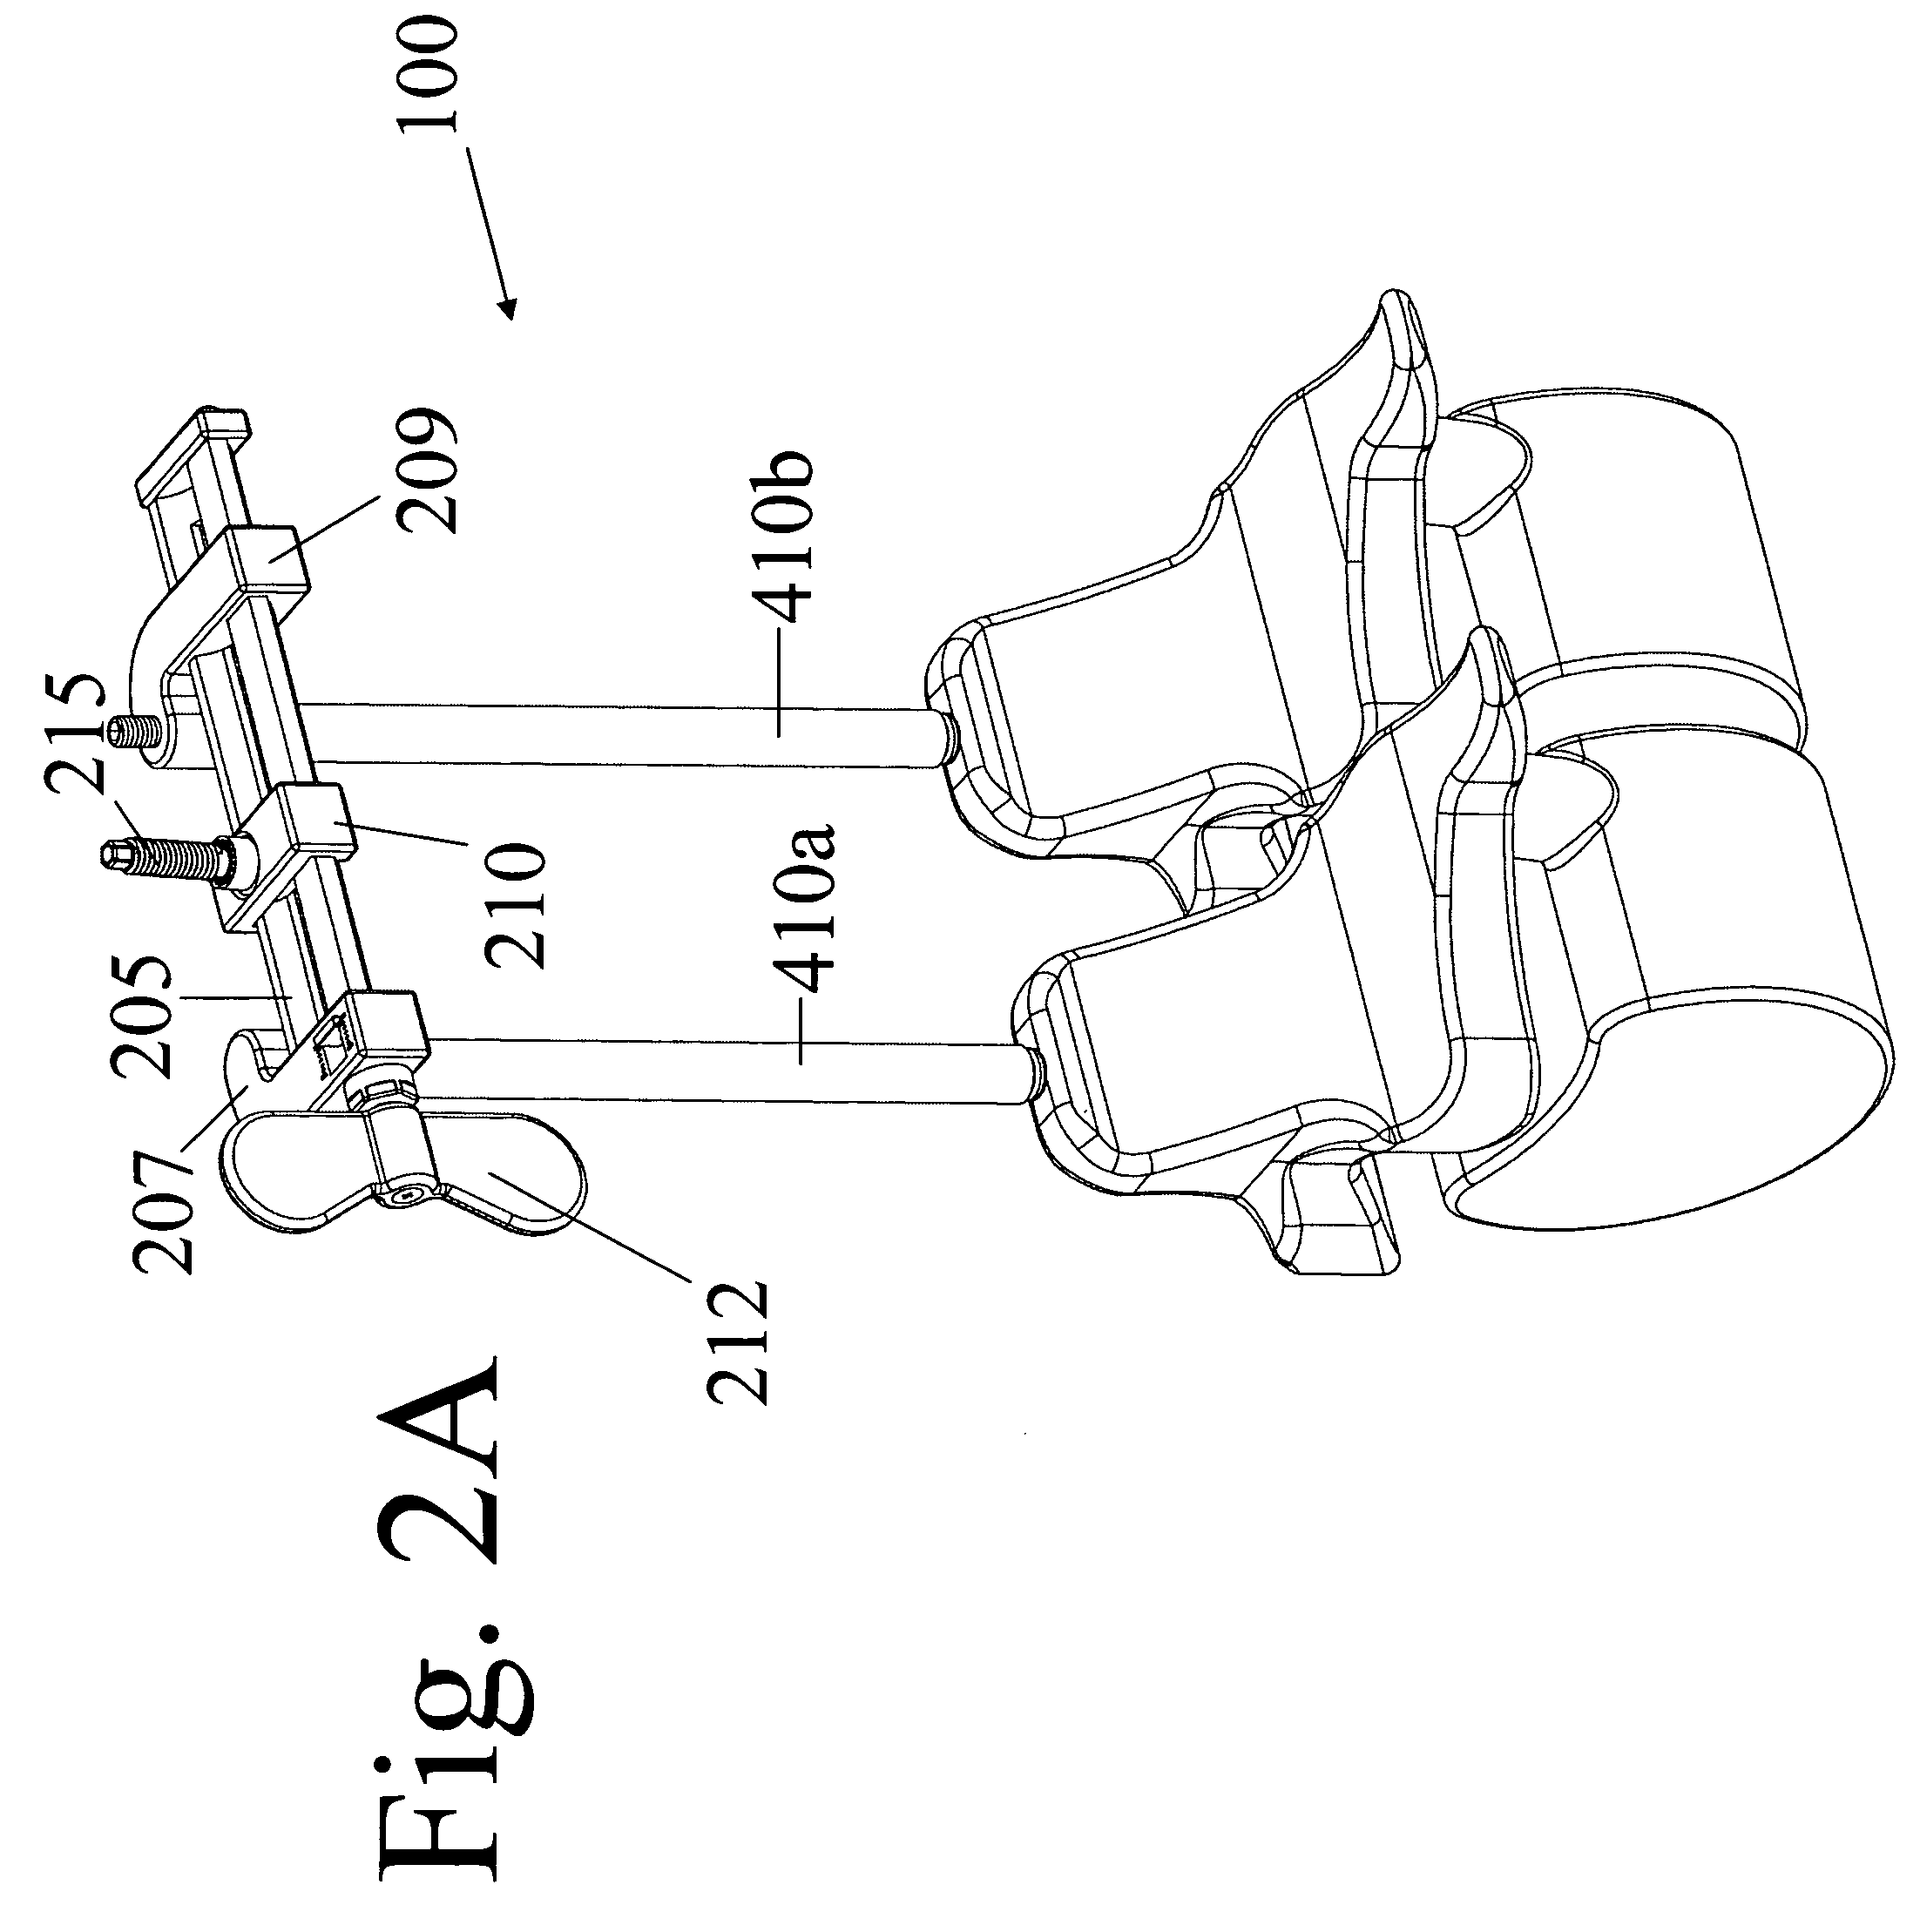 Devices and methods for inter-vertebral orthopedic device placement